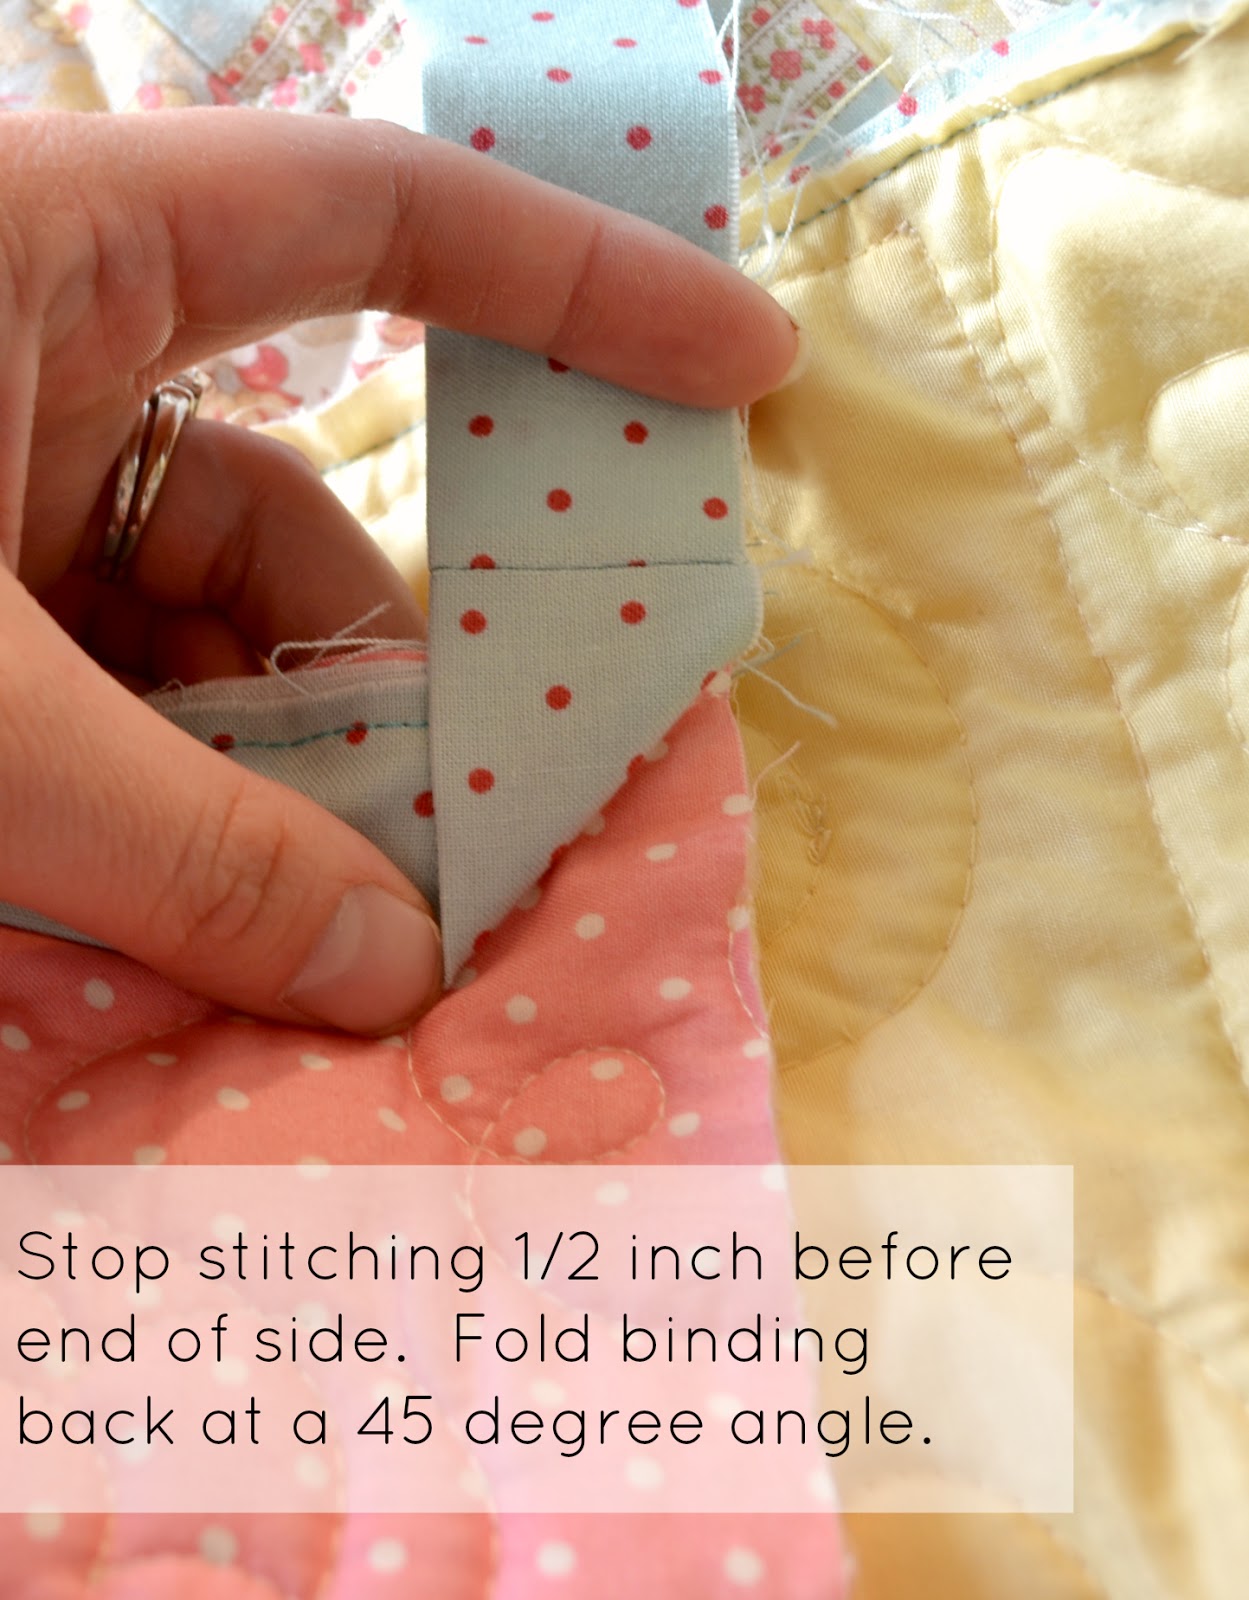 Sewing On Double-Sided Binding On Quilt